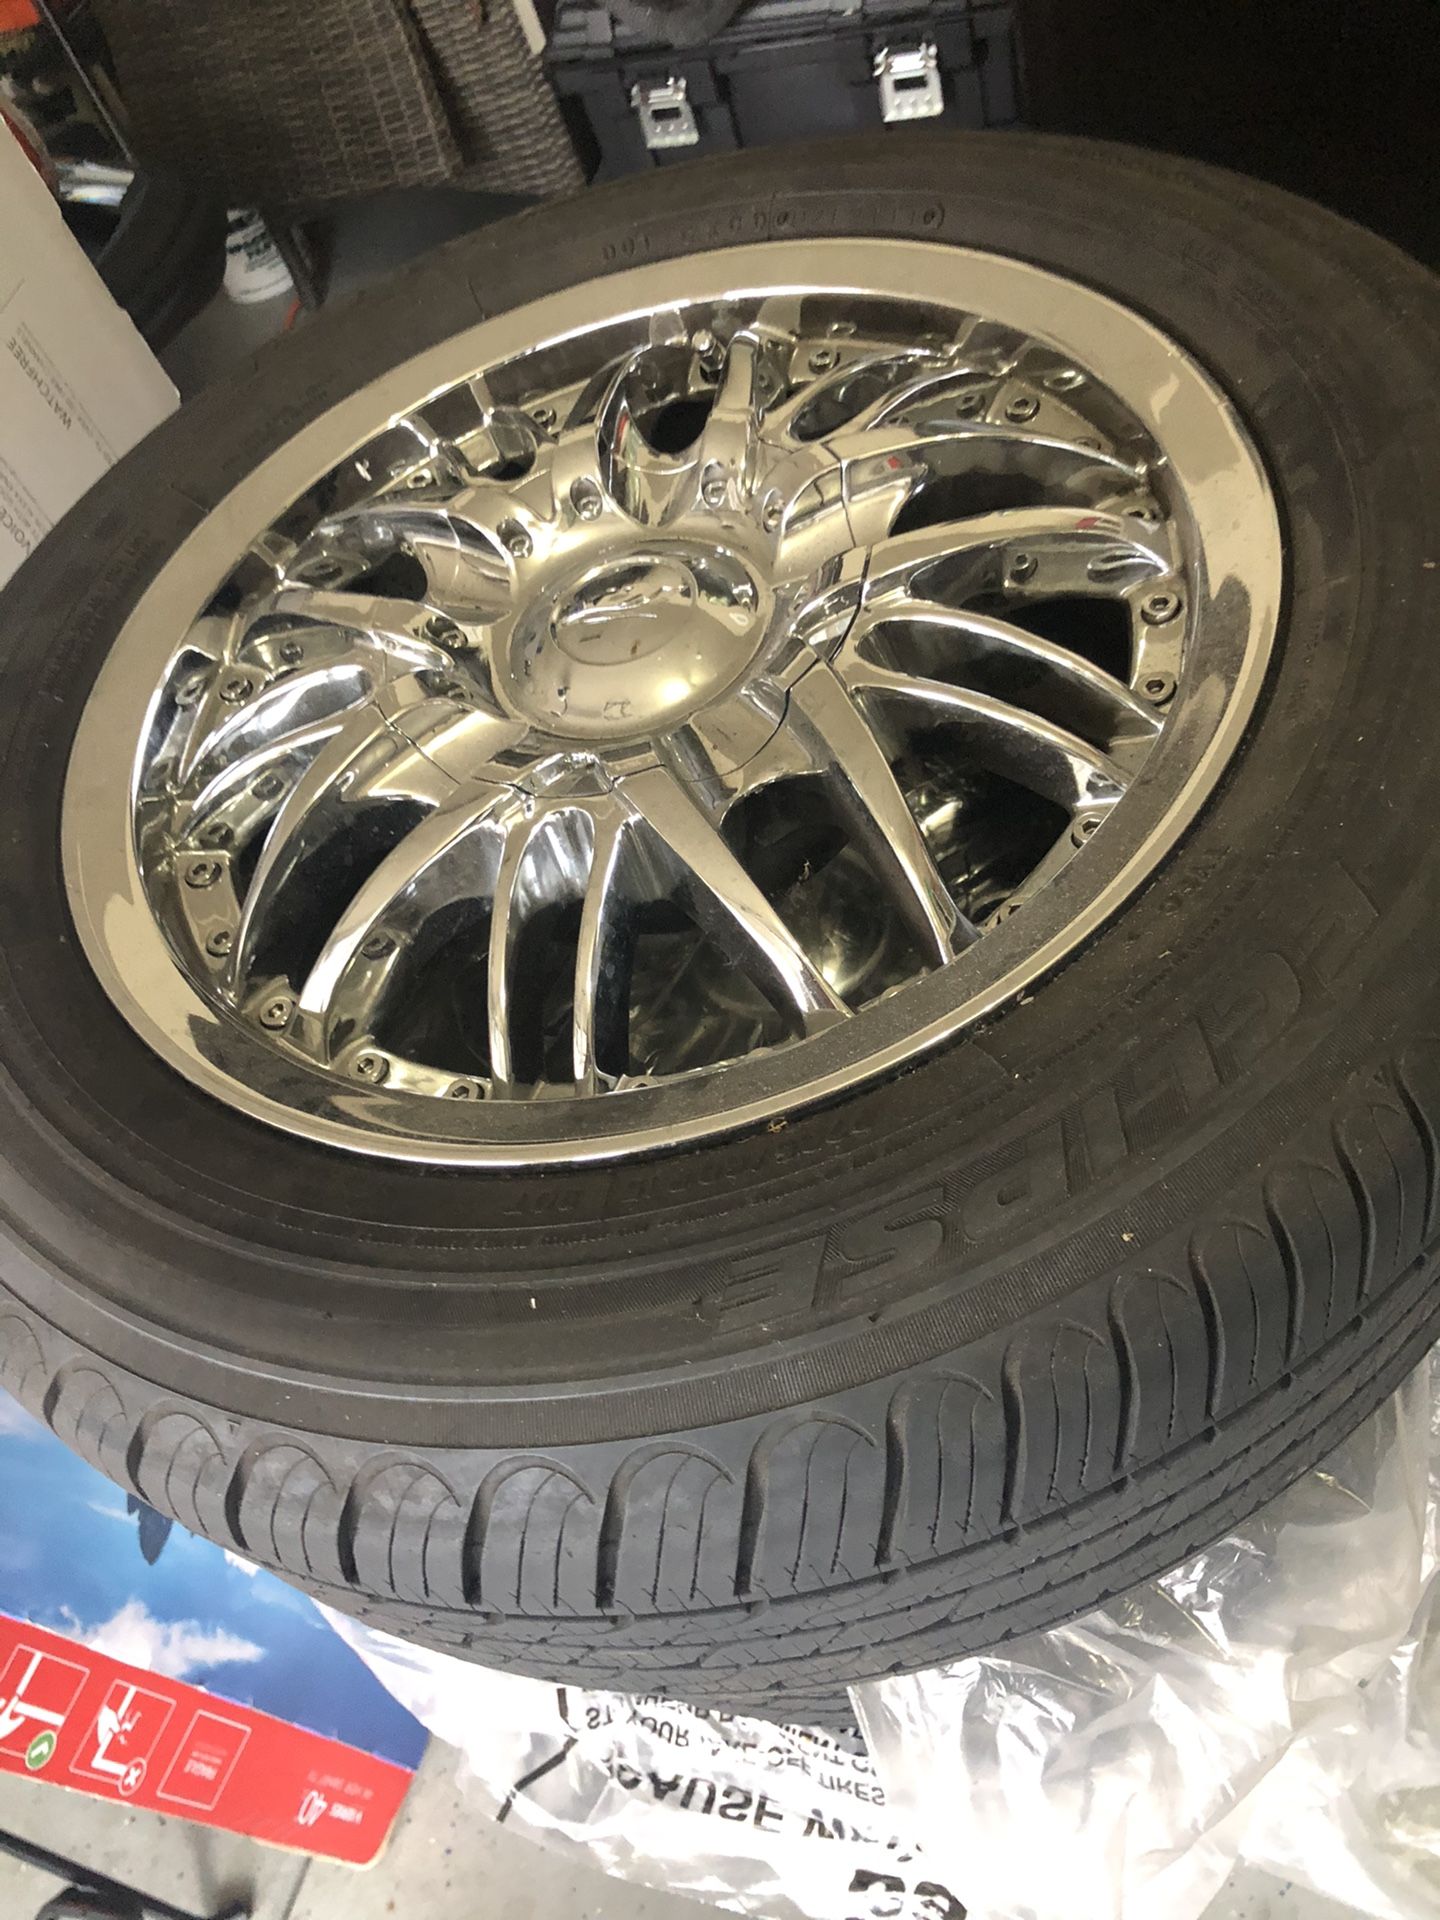 Set of 4 15” tires and rims, barely used